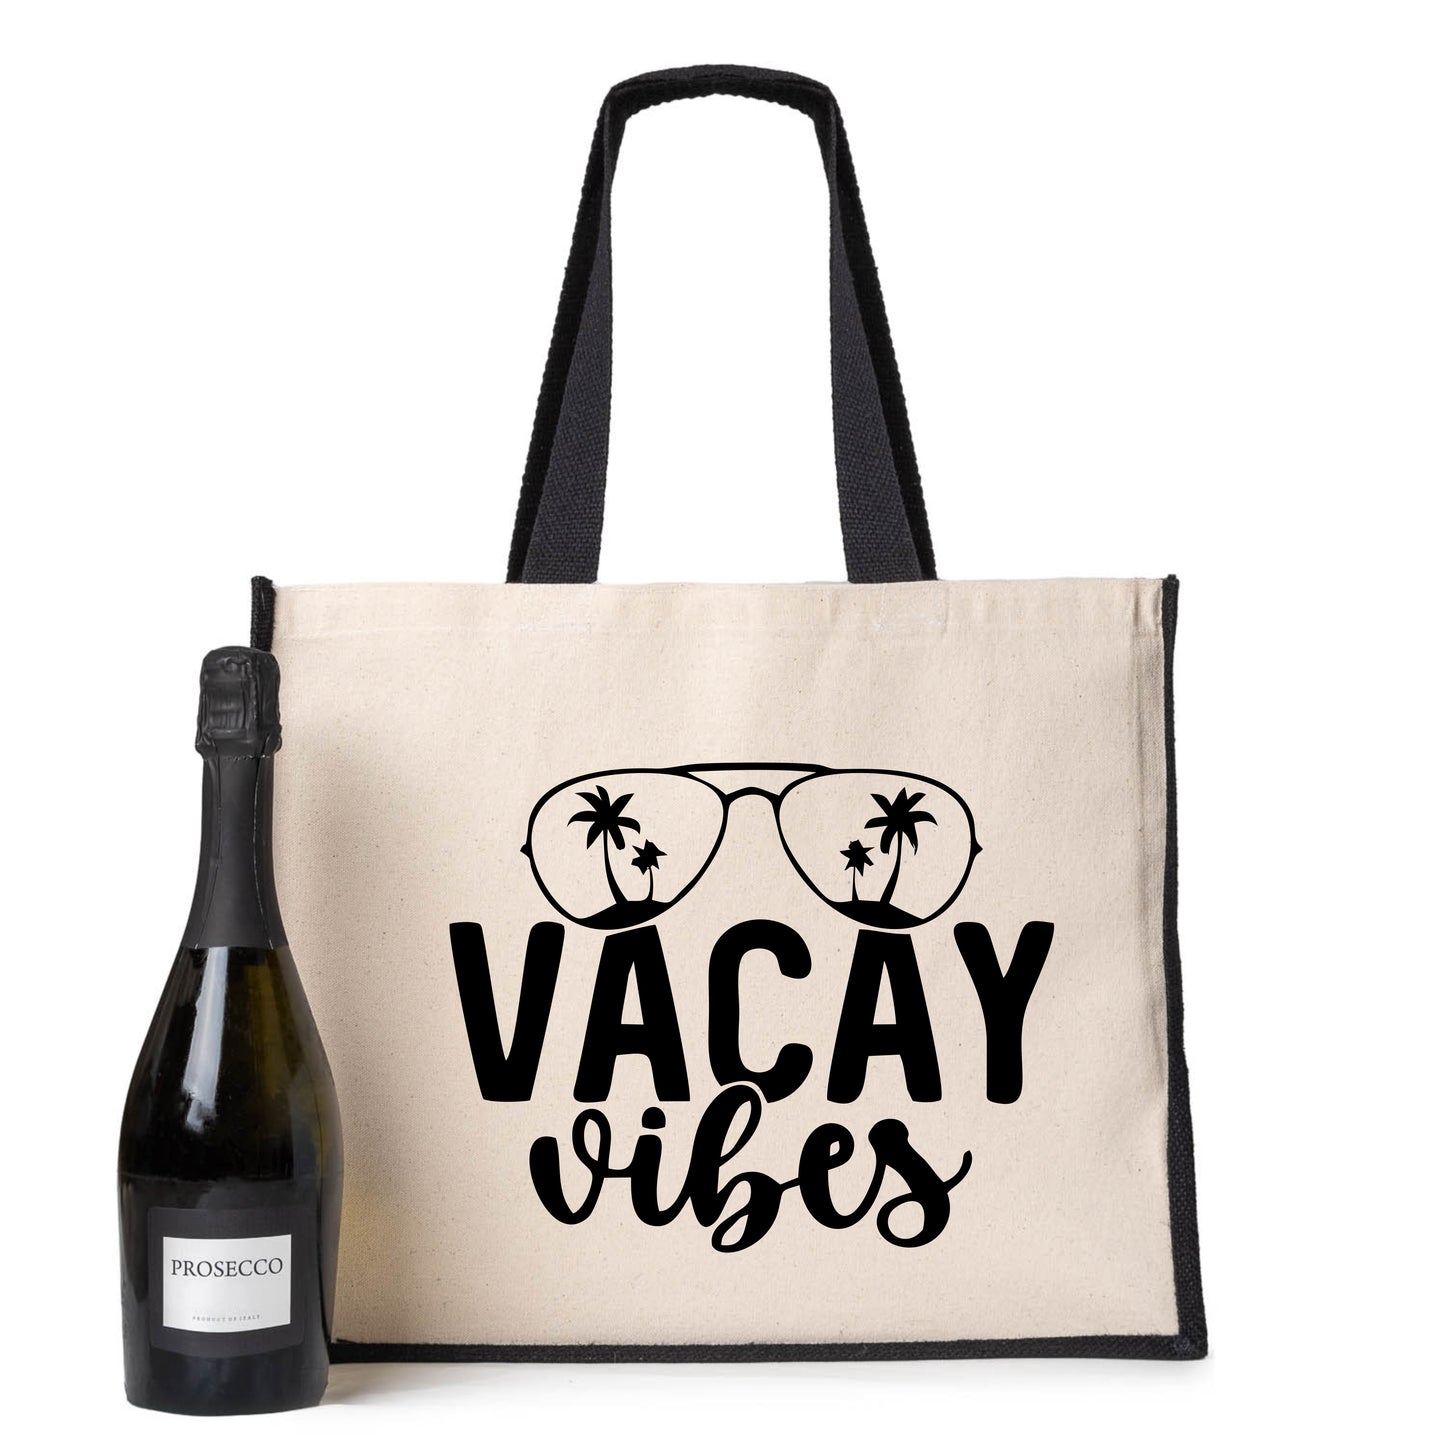 Vacay Vibes Beach Tote Bag Holiday Great For Travel Ladies Canvas Shopper